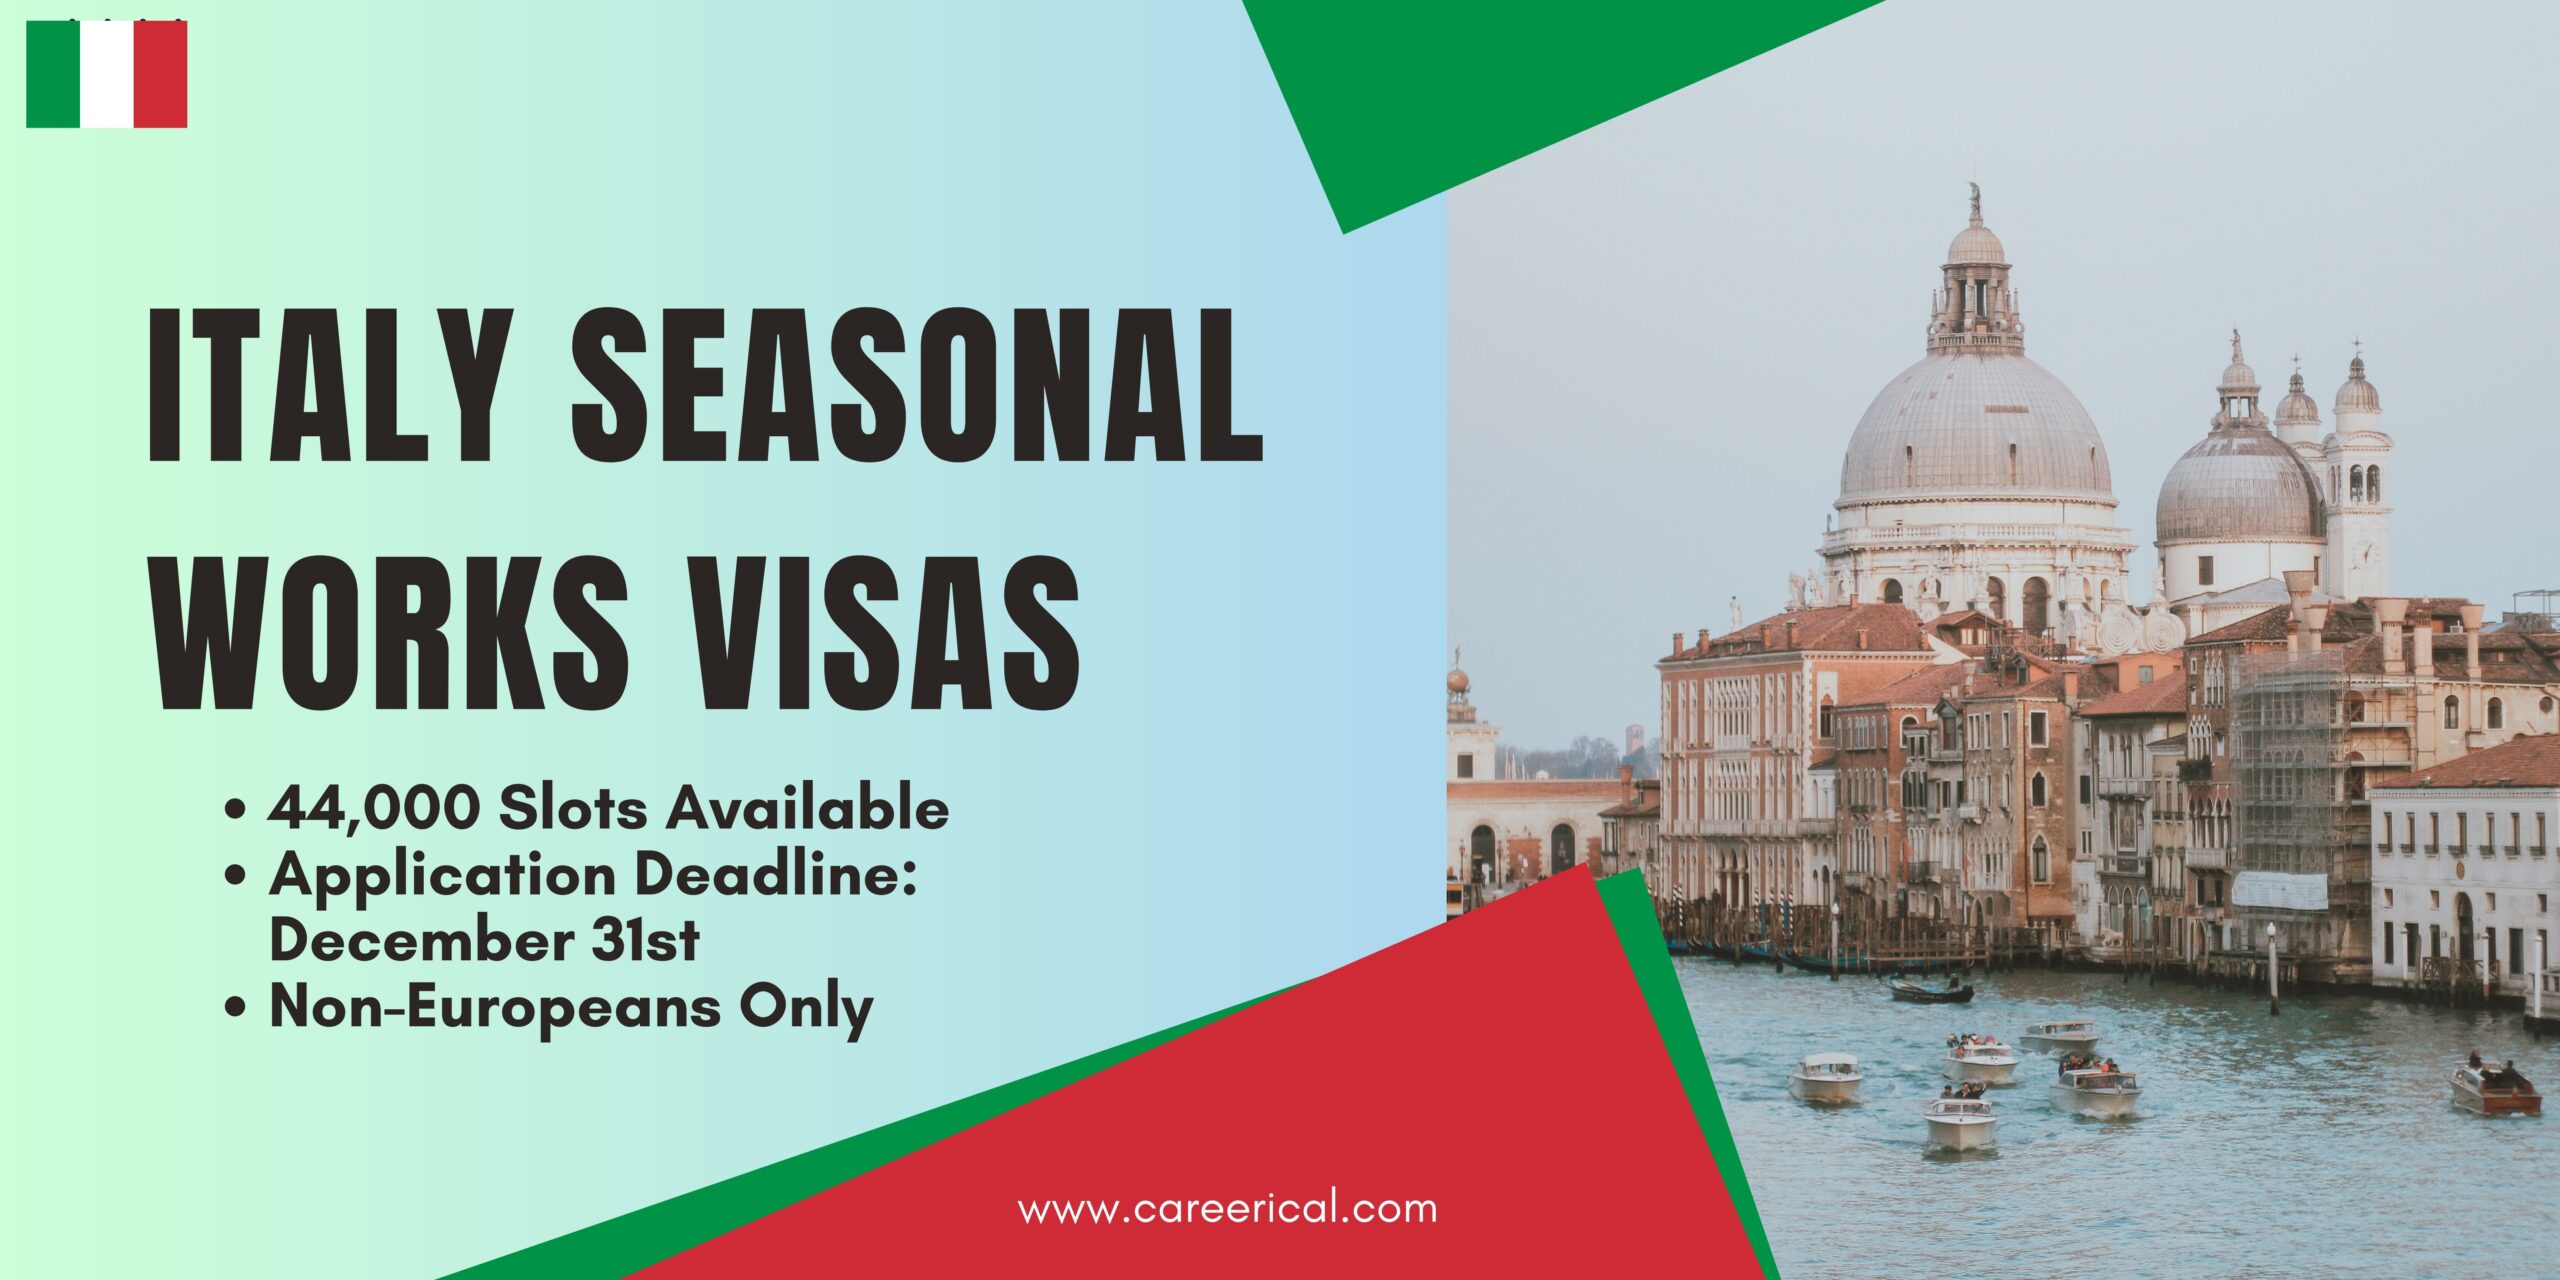 🇮🇹 Jobs in Italy 44,000 Seasonal Works Visas Currently Available for